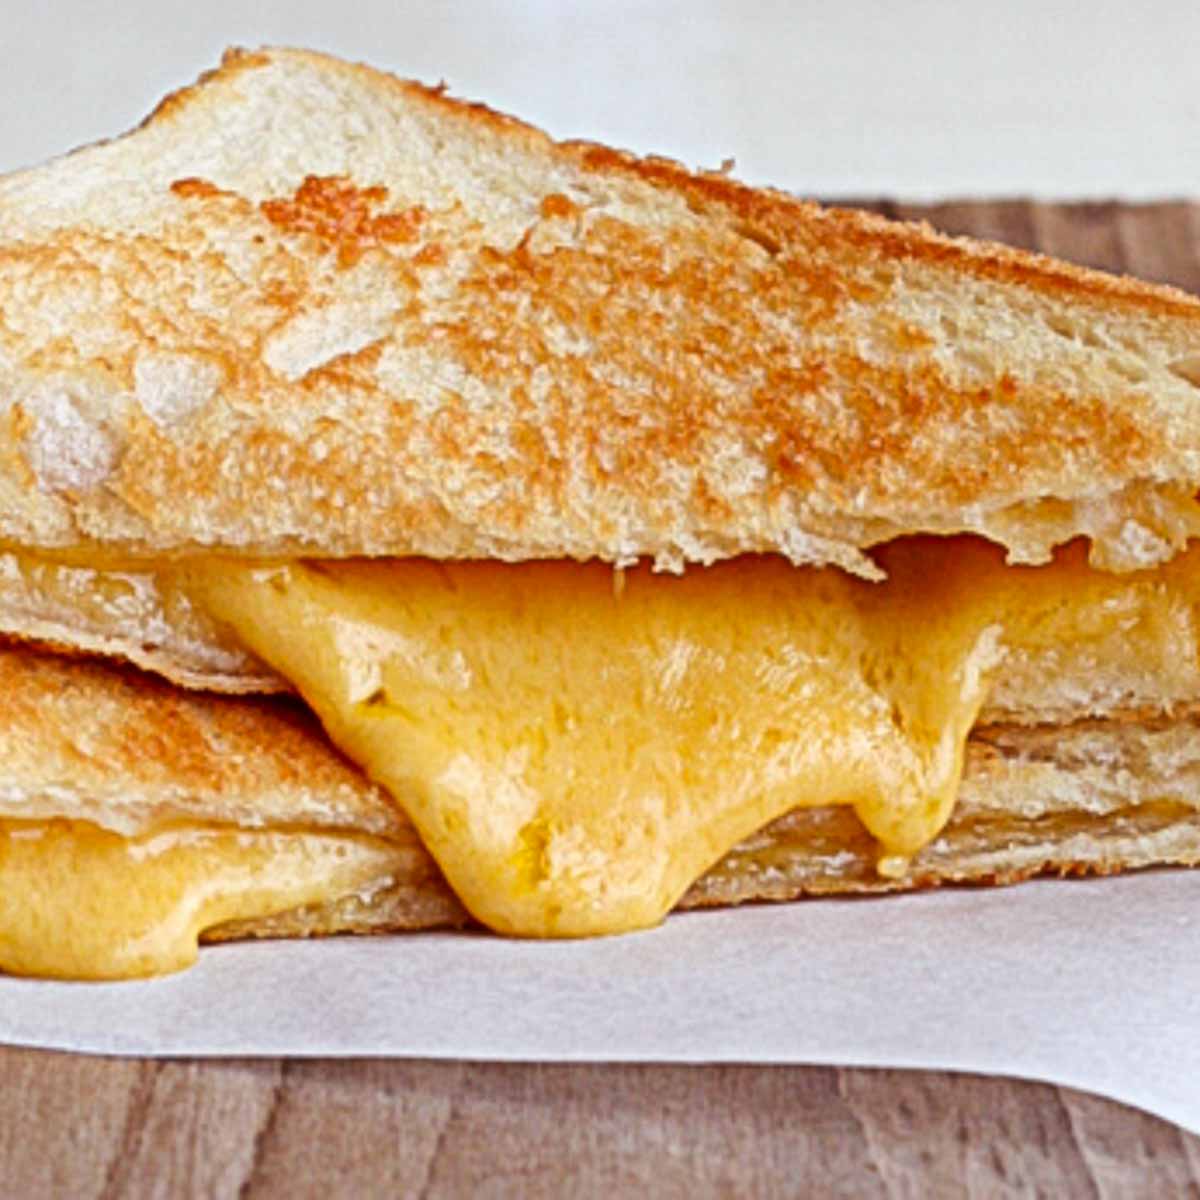 How to Make a Grilled Cheese Sandwich - Kitchen Treaty